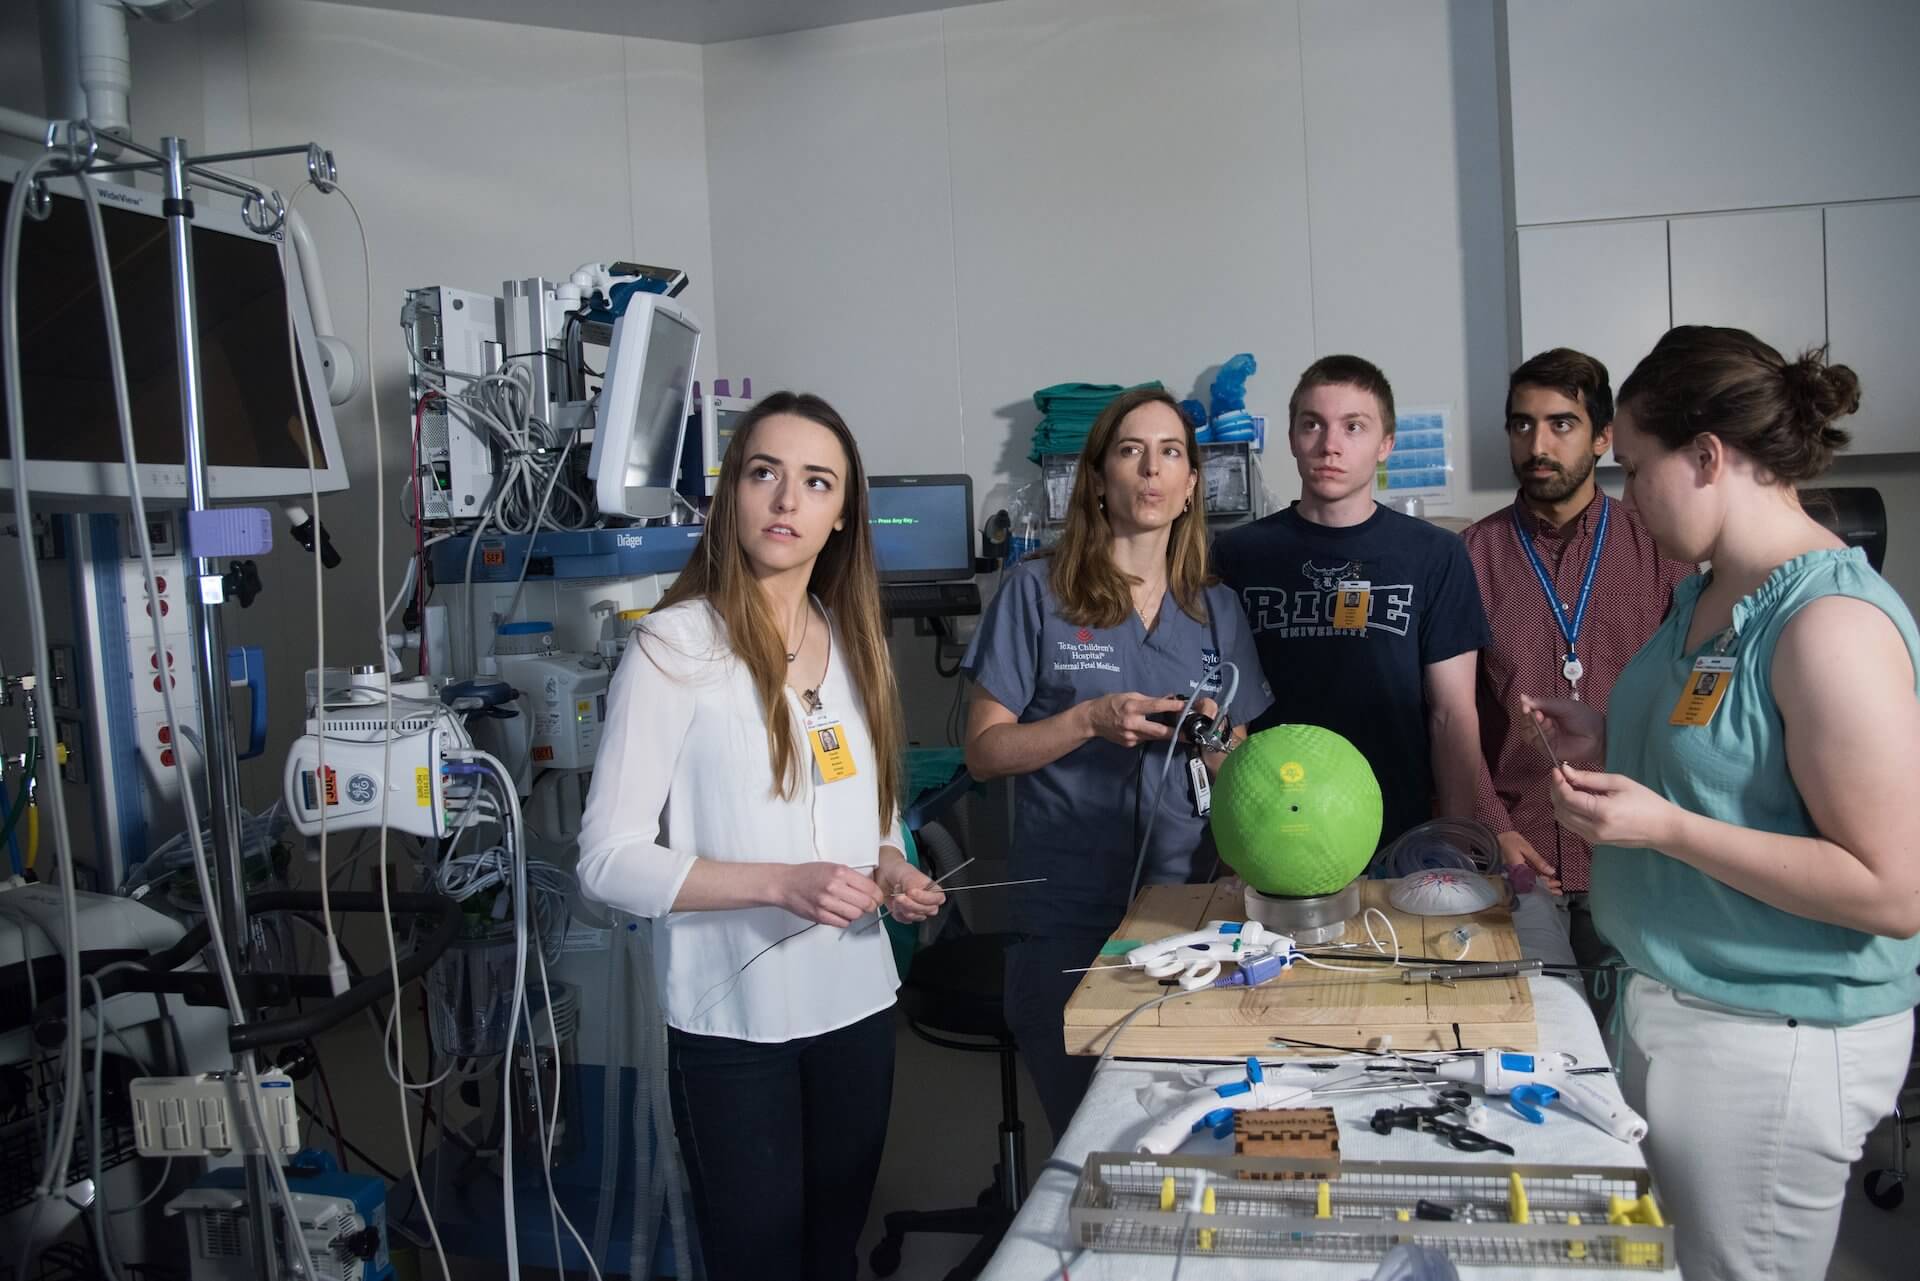 Rice students and their adviser, Dr. Magdalena Sanz Cortes, watch a monitor as their endoscopic pulse oximeter is put through its paces at Texas Children's Hospital. From left: Claudia Iriondo, Sanz Cortes, Thomas Loughlin, Samir Saidi and Kathryn Wallace. (Credit: Jeff Fitlow)